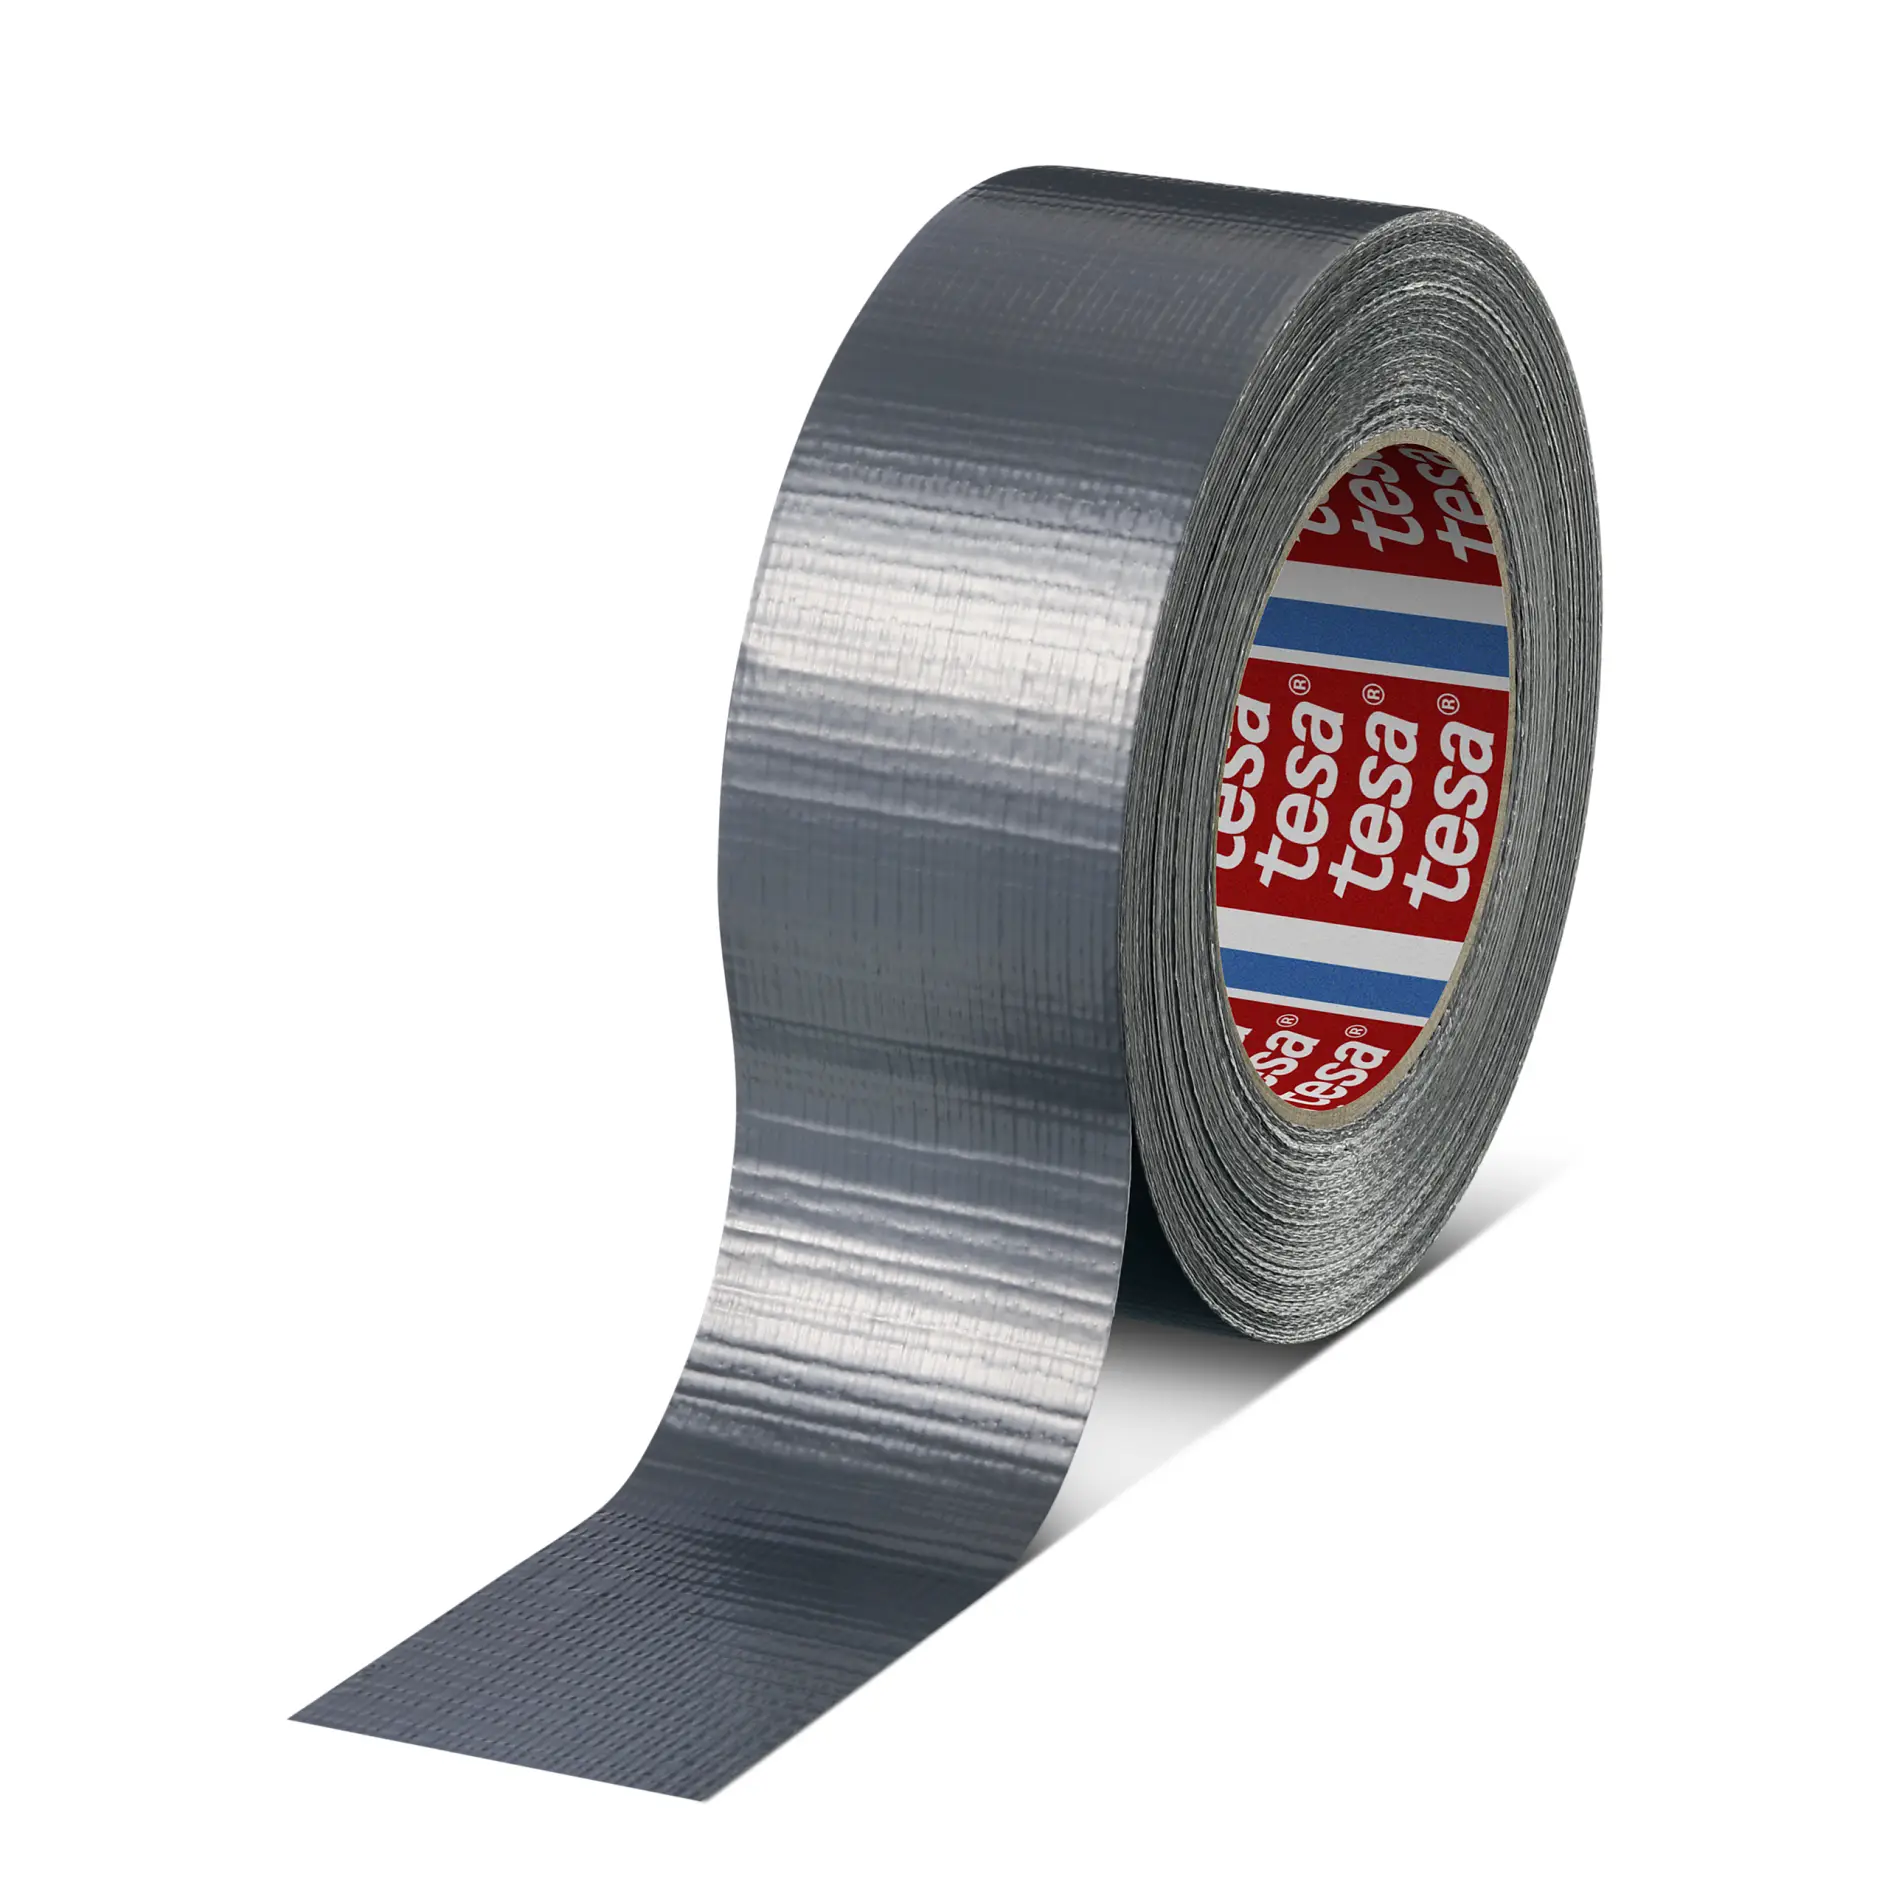 tesa-professional-4613-duct-tape-simple-applications-gray-046130003701-pr